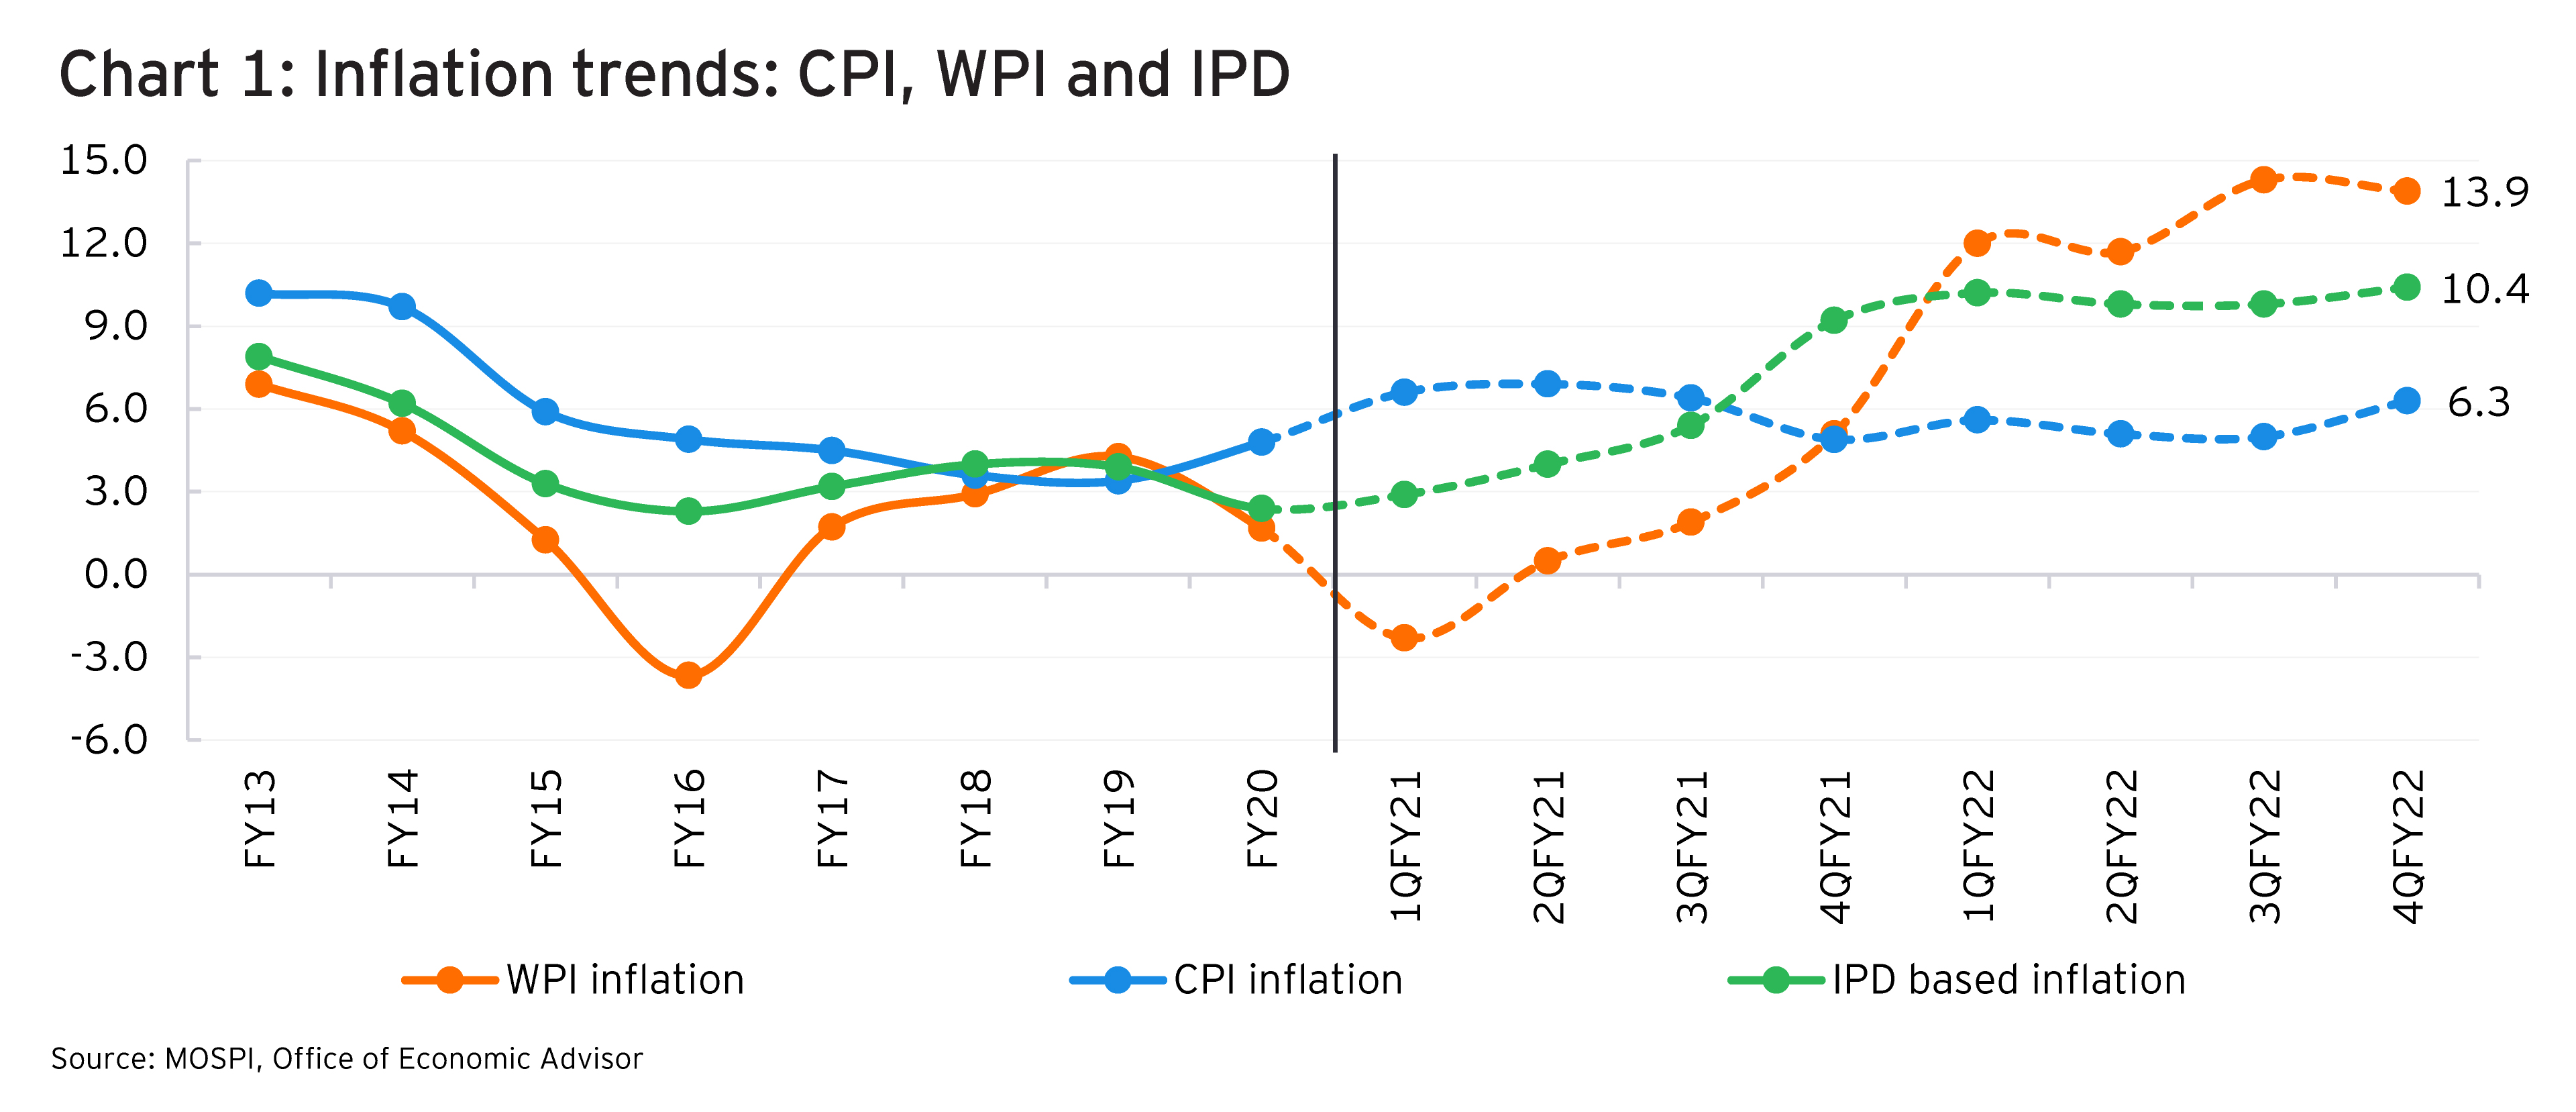 Inflation trends: CPI, WPI and IPD